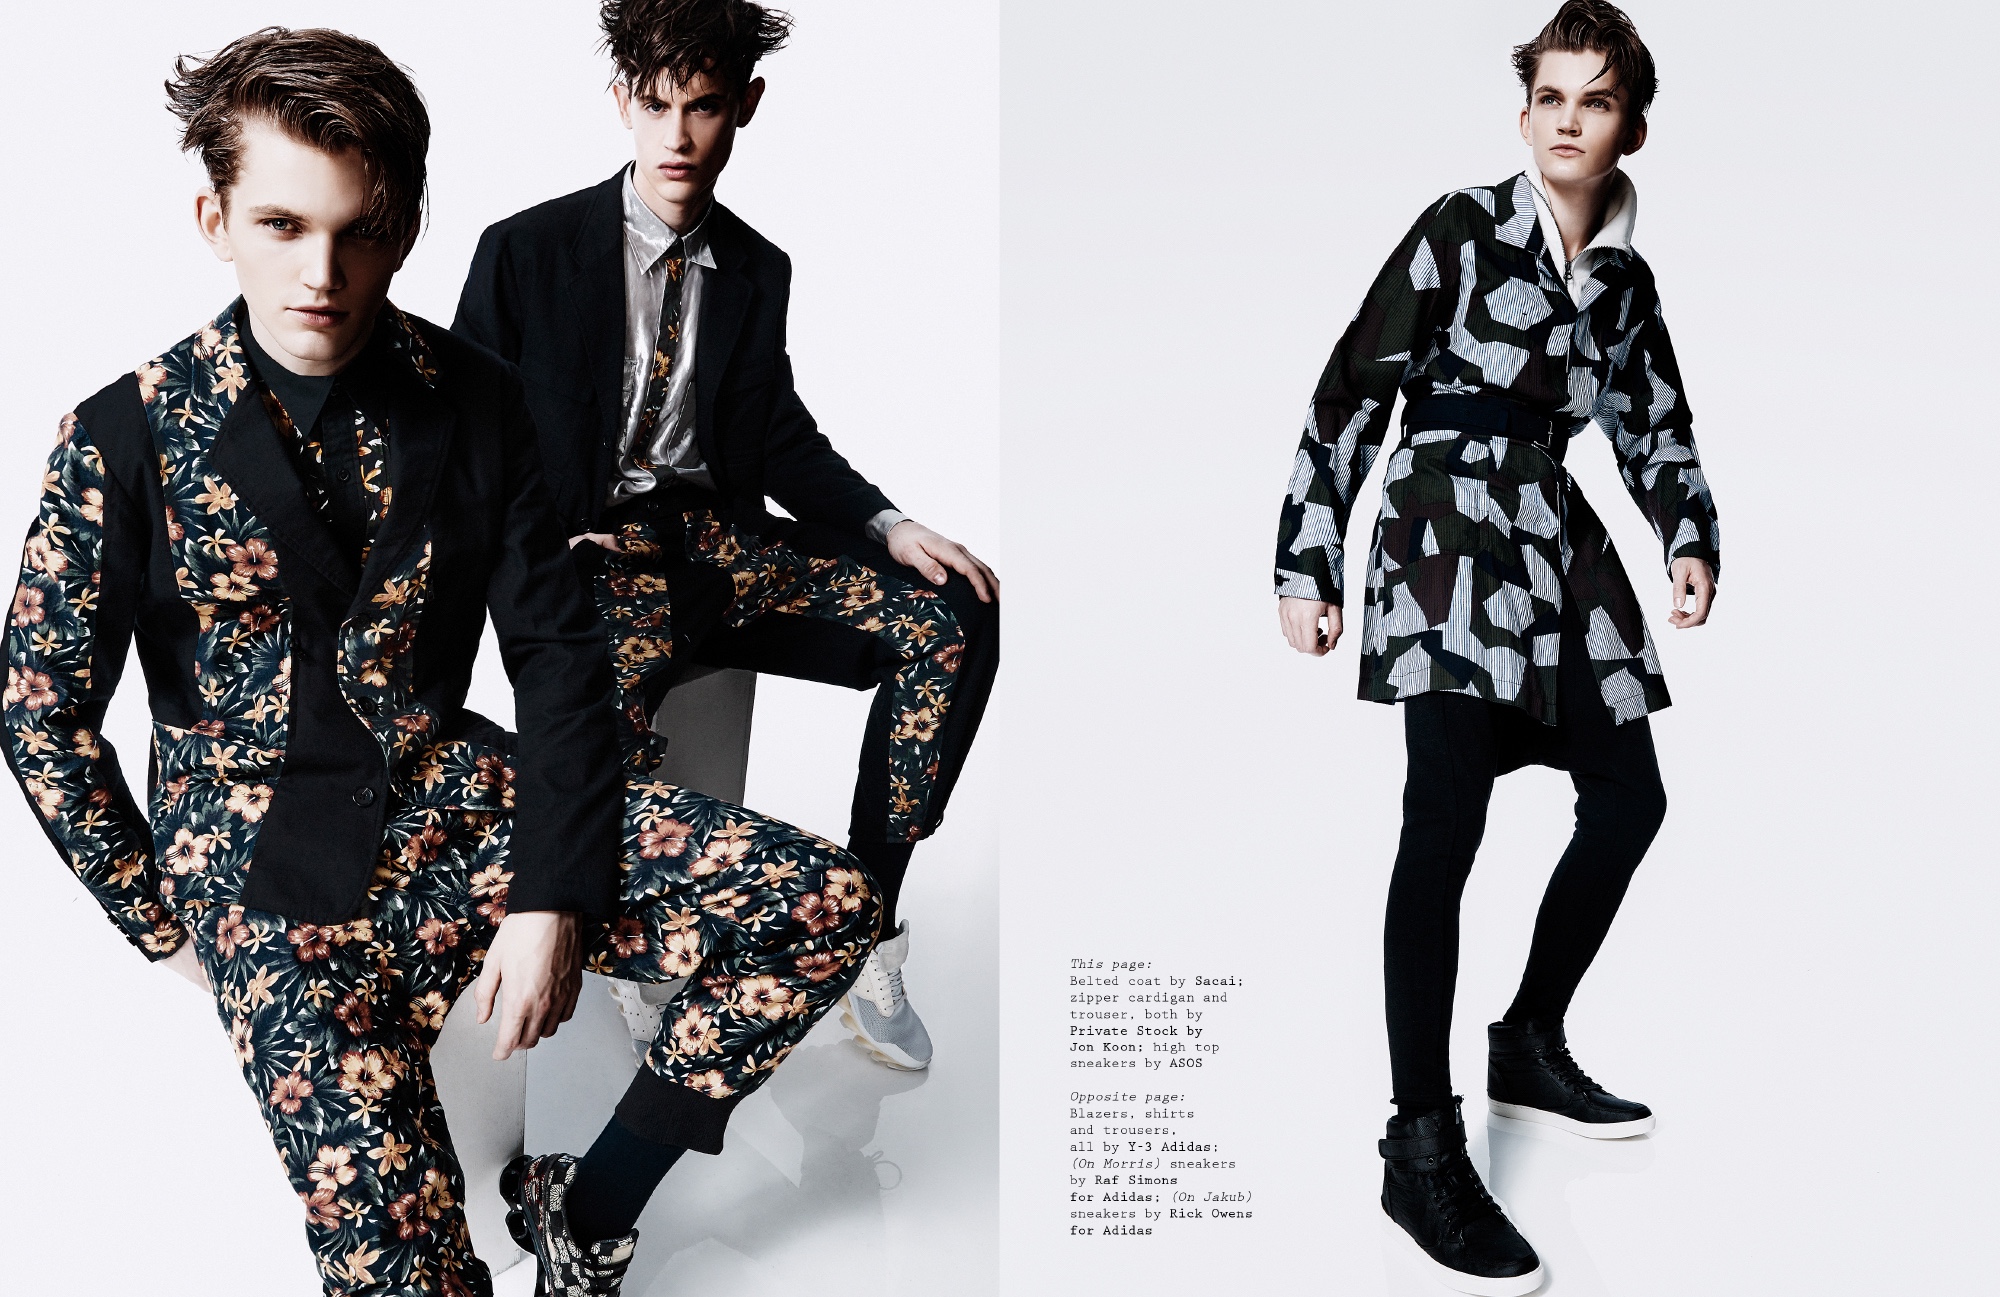 Jakub + Morris Are Twins in Style for Visual Tales – The Fashionisto